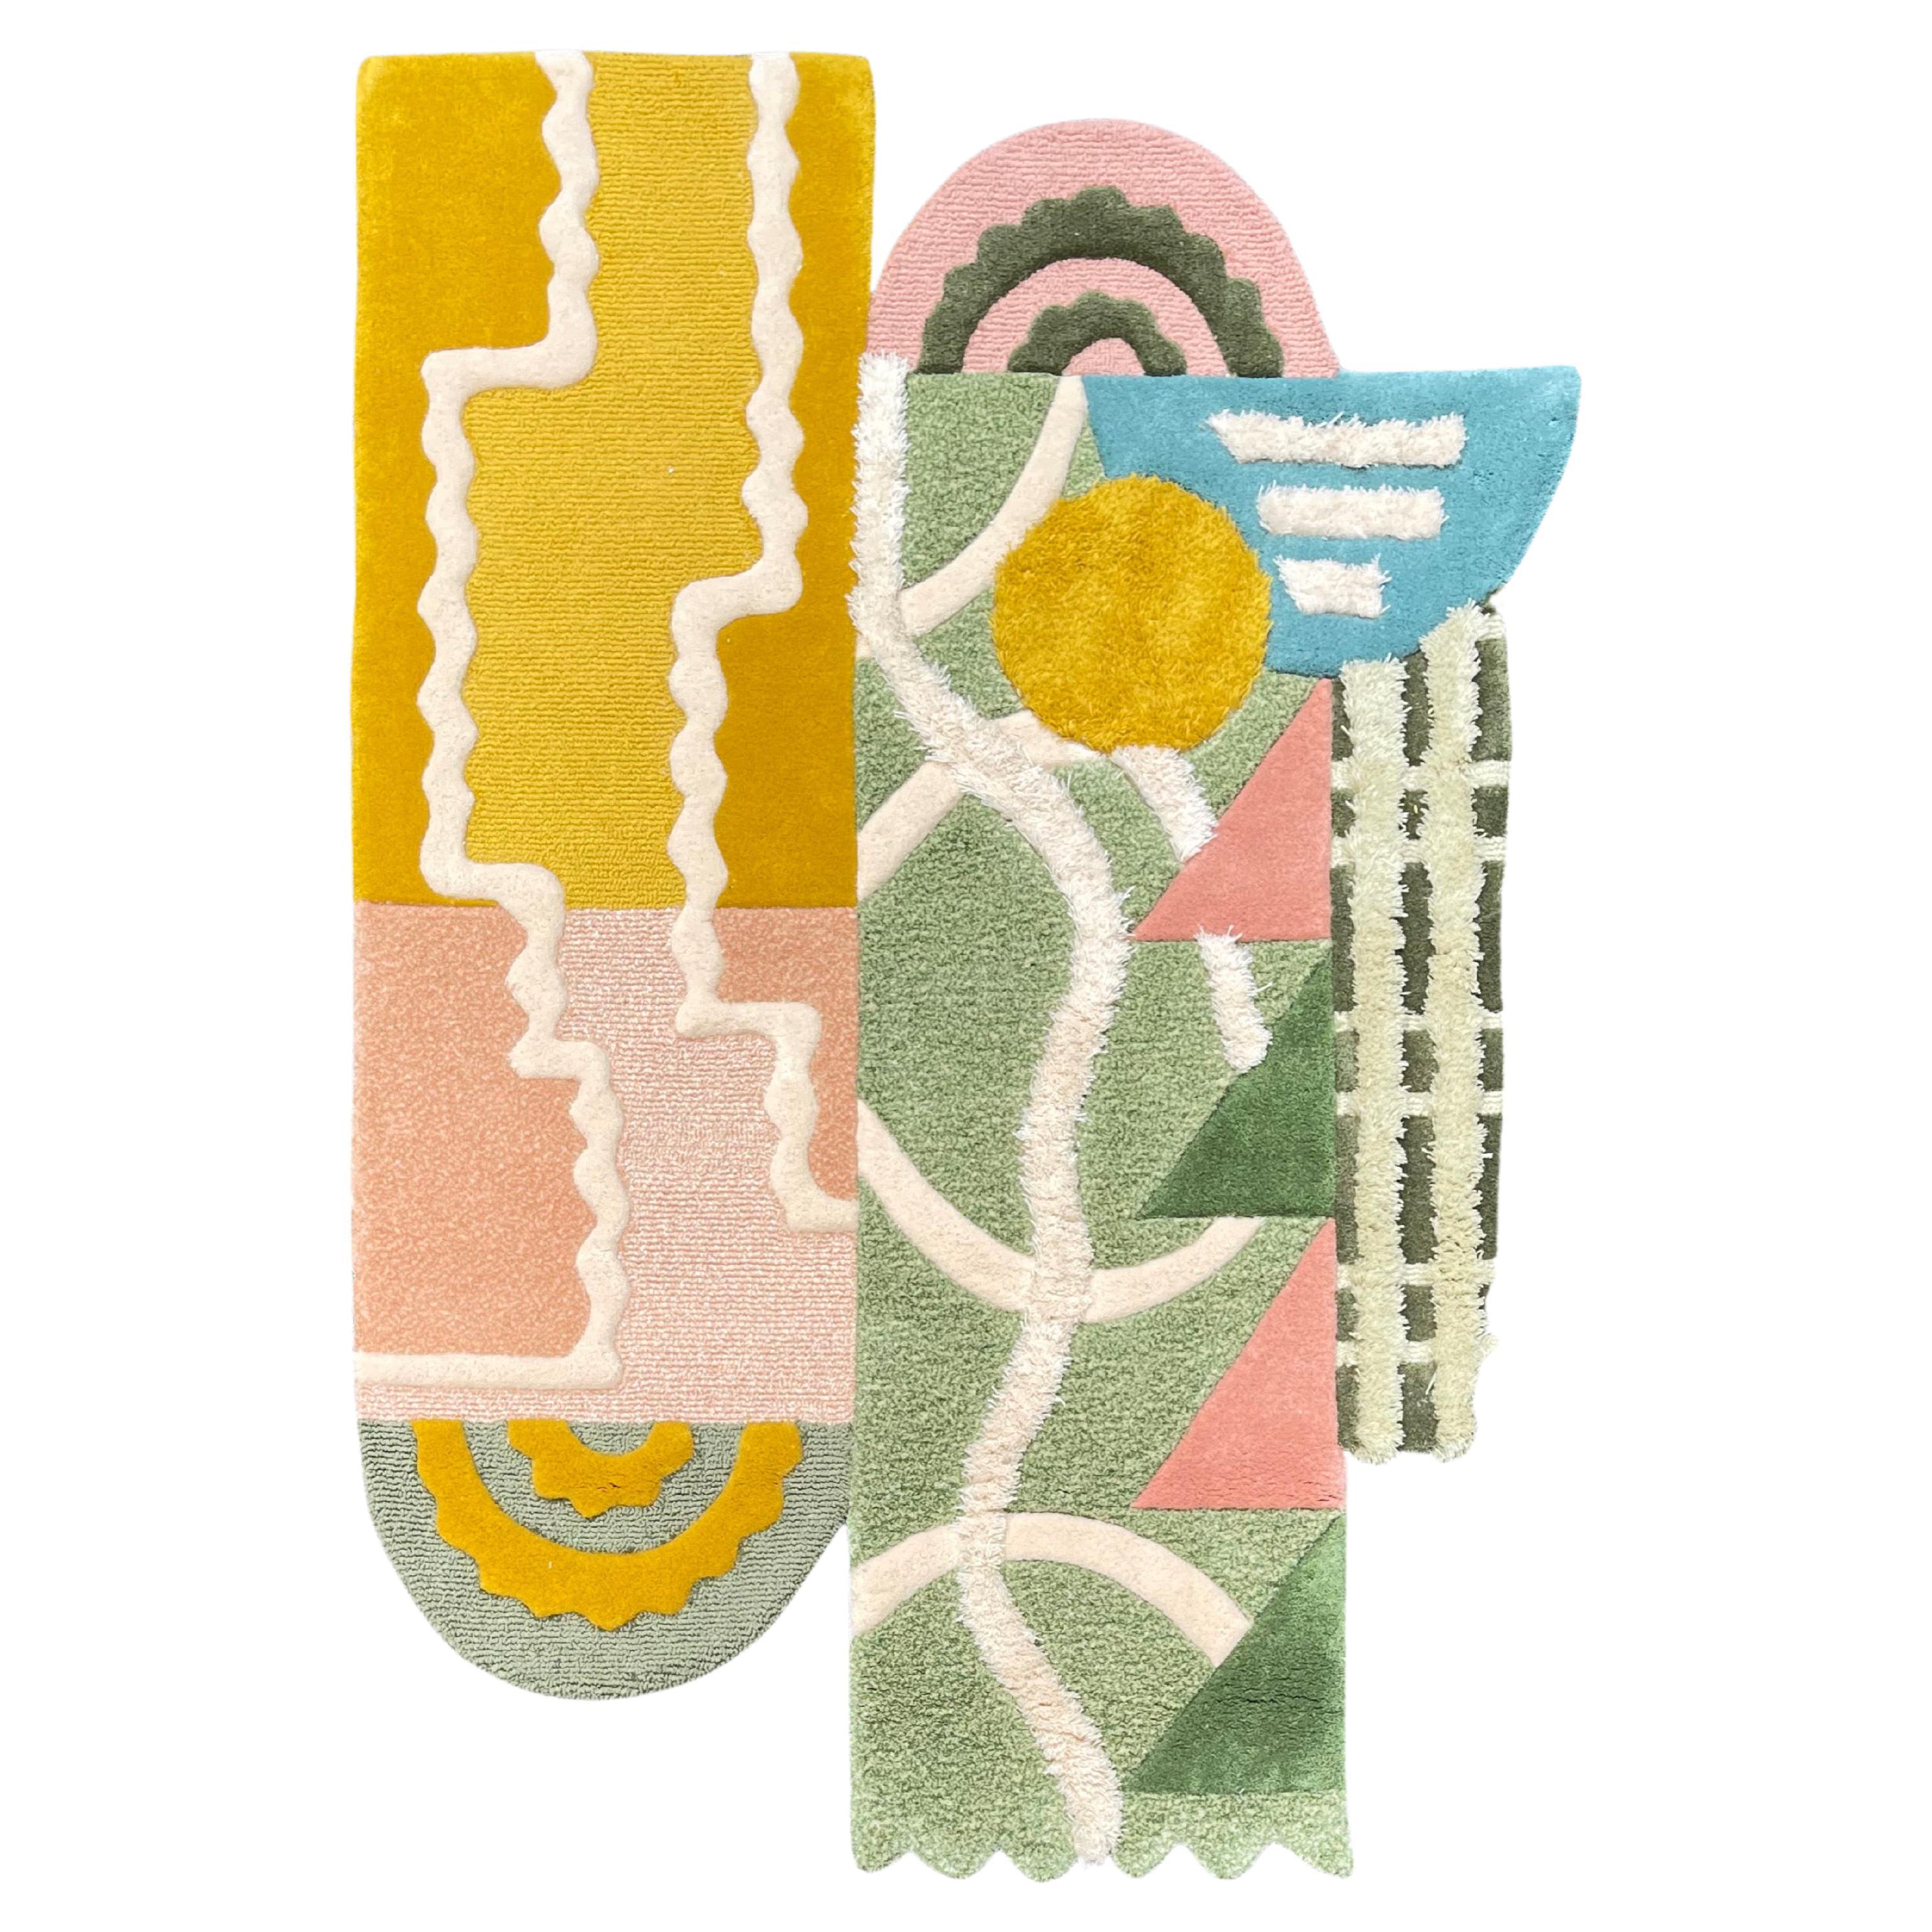 ' Hellow Yellow ' Modern Style Rug with Irregular Shapes mixed with Pastel Yellow Green Peach Beige and Blue

Original designed by RAG Home Jakarta
Hand-tufted with mixed carving embossed shaggy loop cut methods and bright and pastel colours. It can